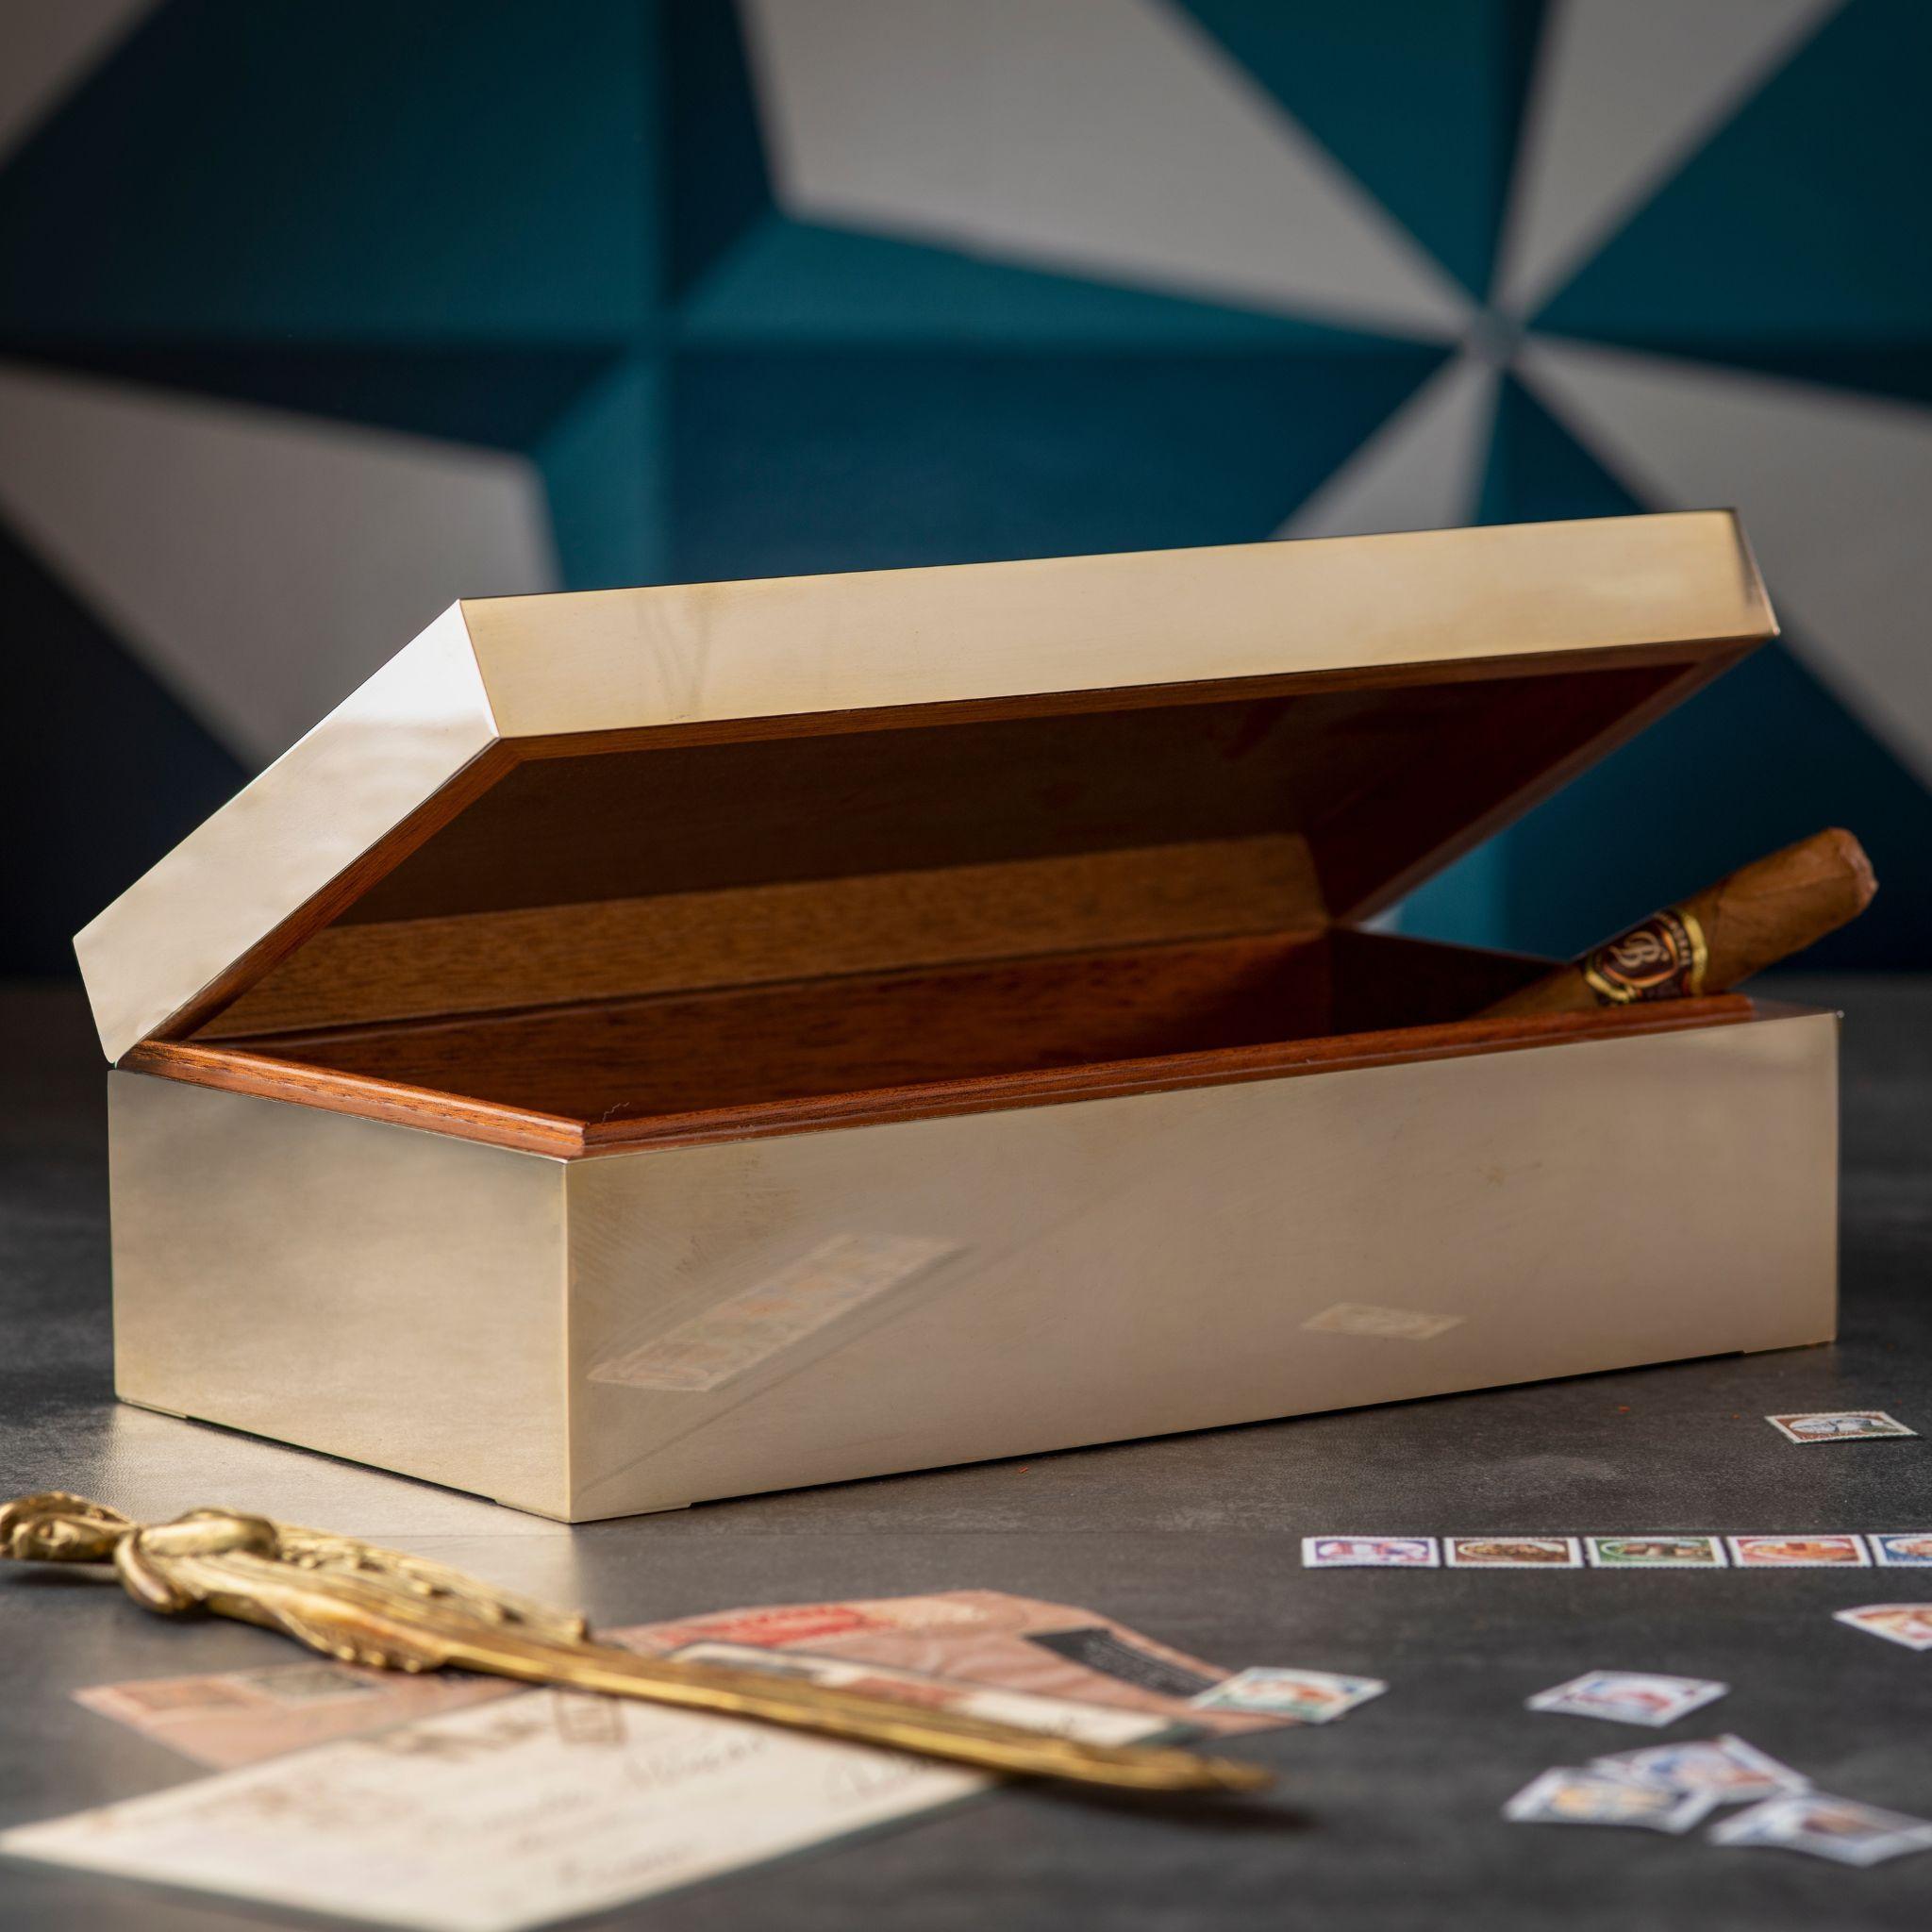 Keep your cigars fresh and organized in our stylish brass cigar box with a wooden interior. Made from high-quality brass and wood, its unique and elegant design adds sophistication to any decor. With a hinged lid for easy access, it is perfect for